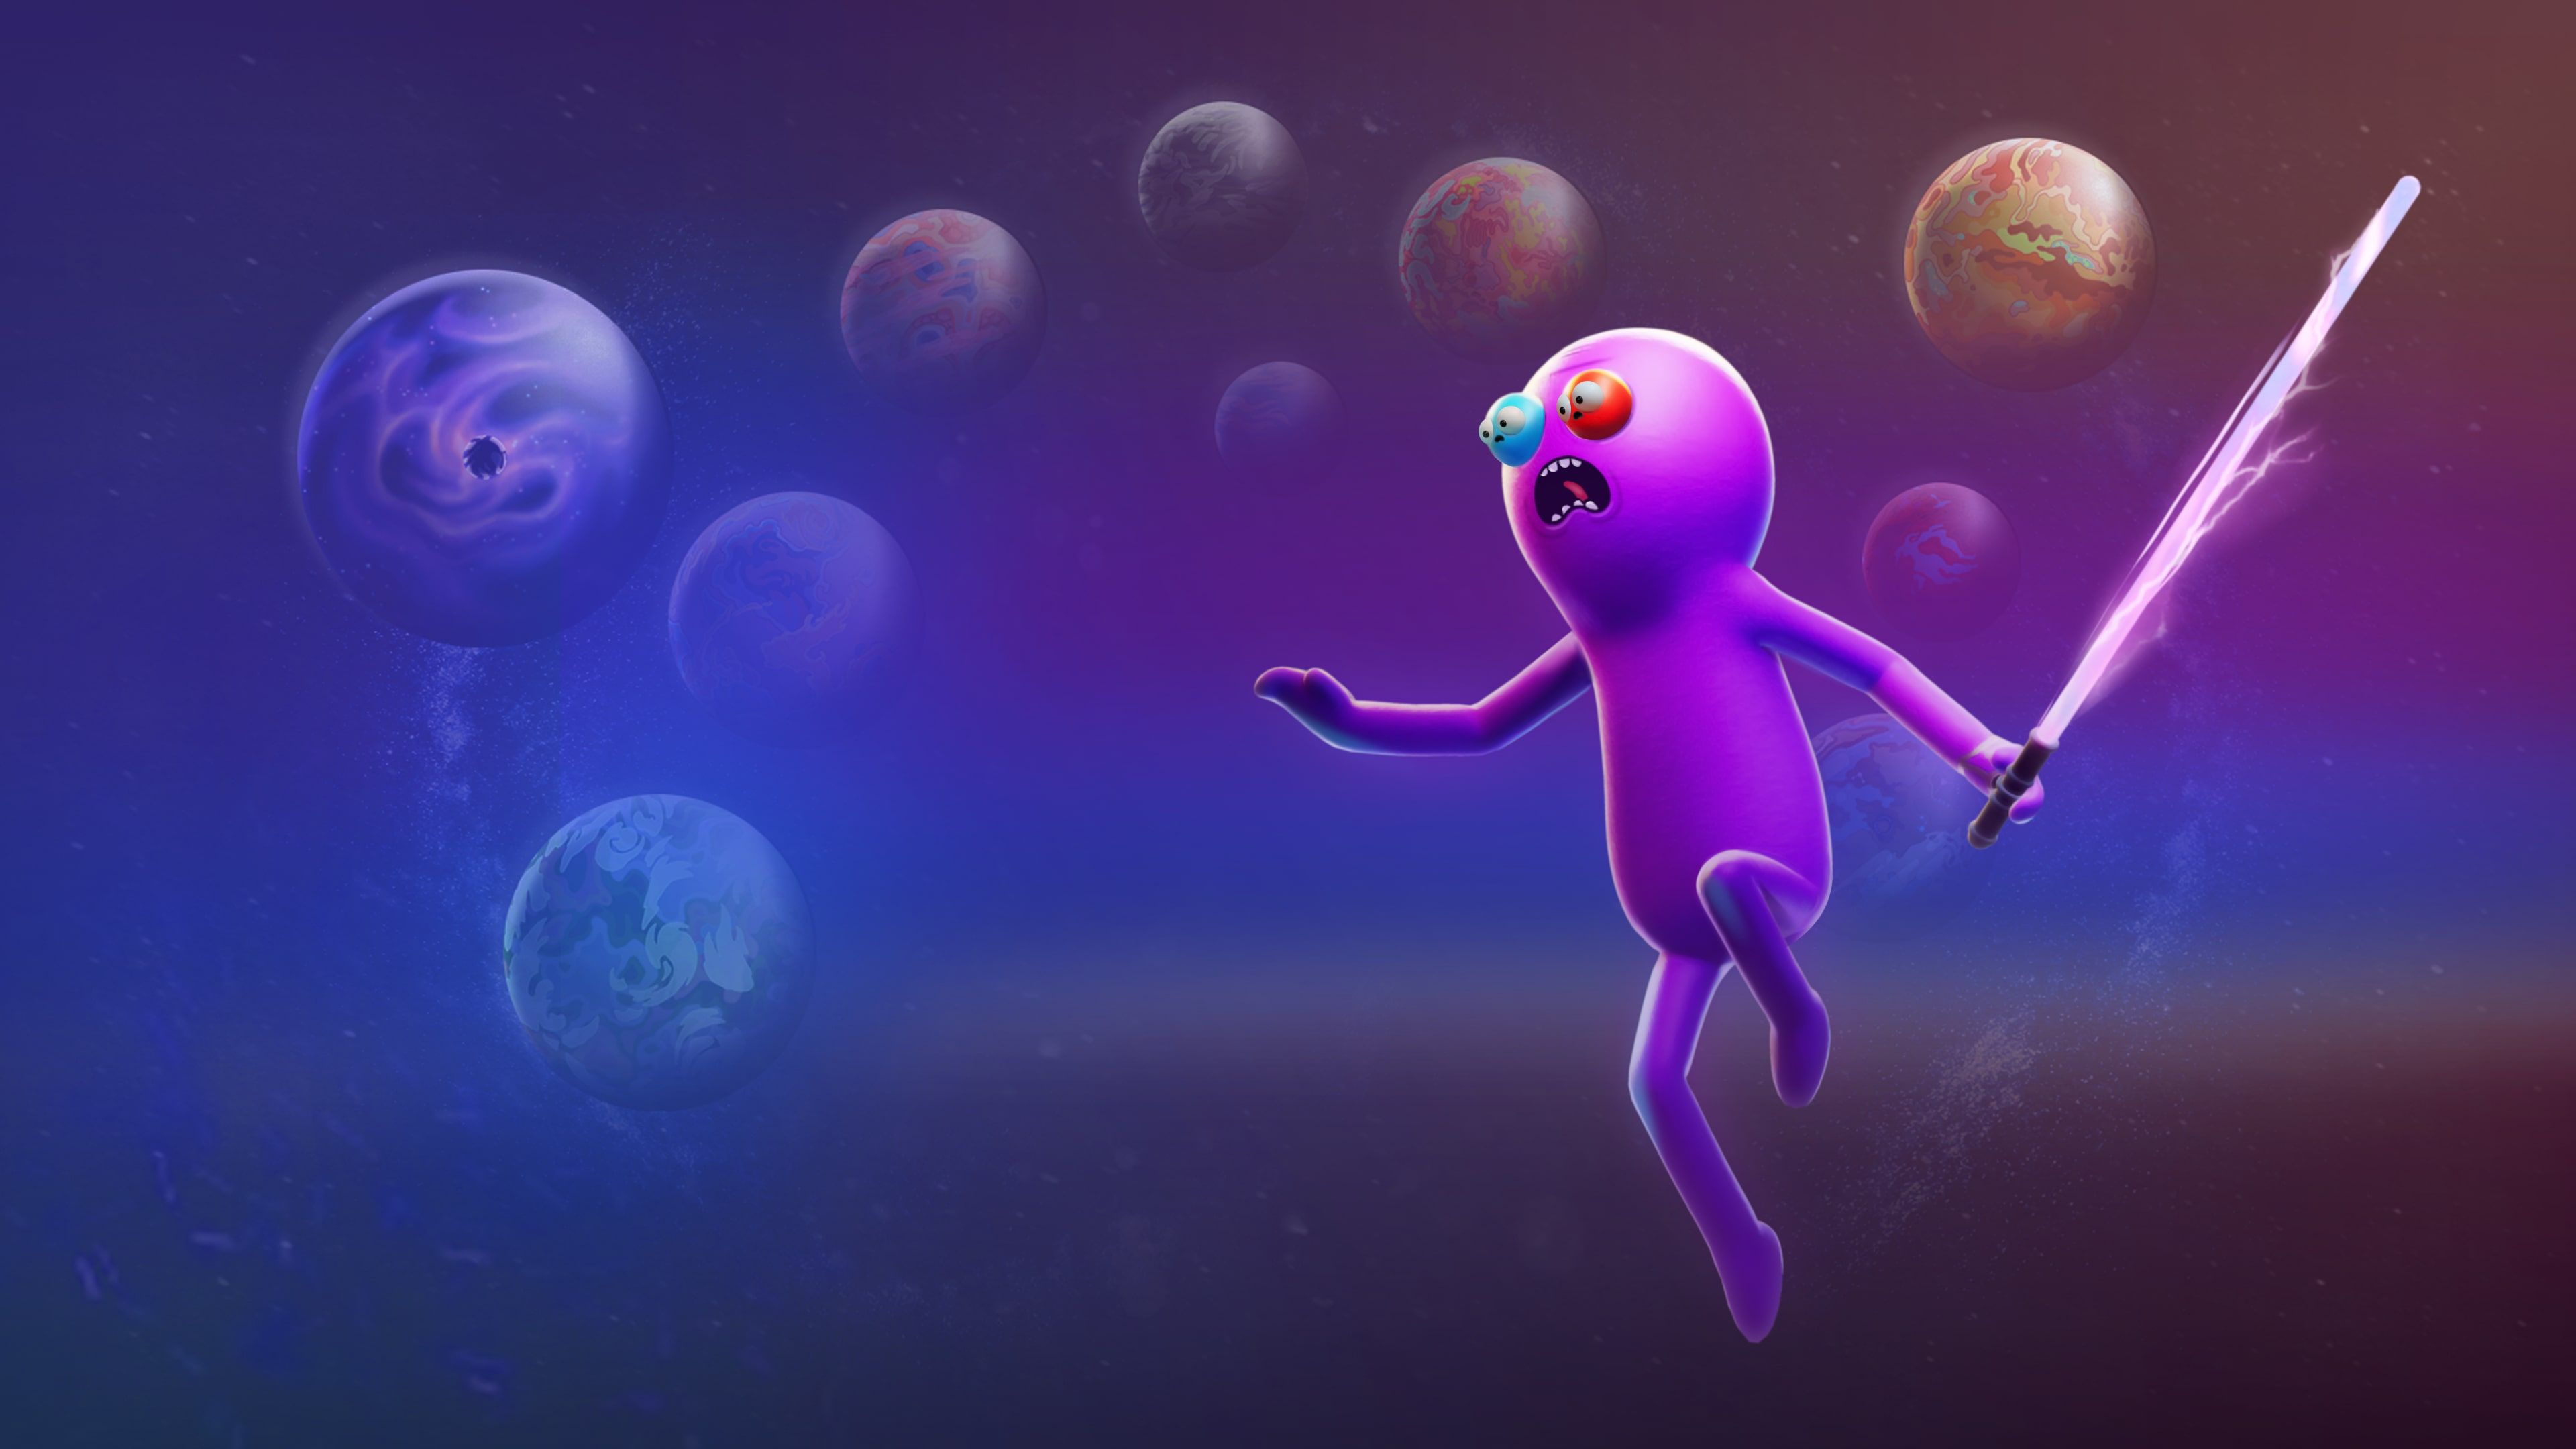 Trover Saves The Universe cover image